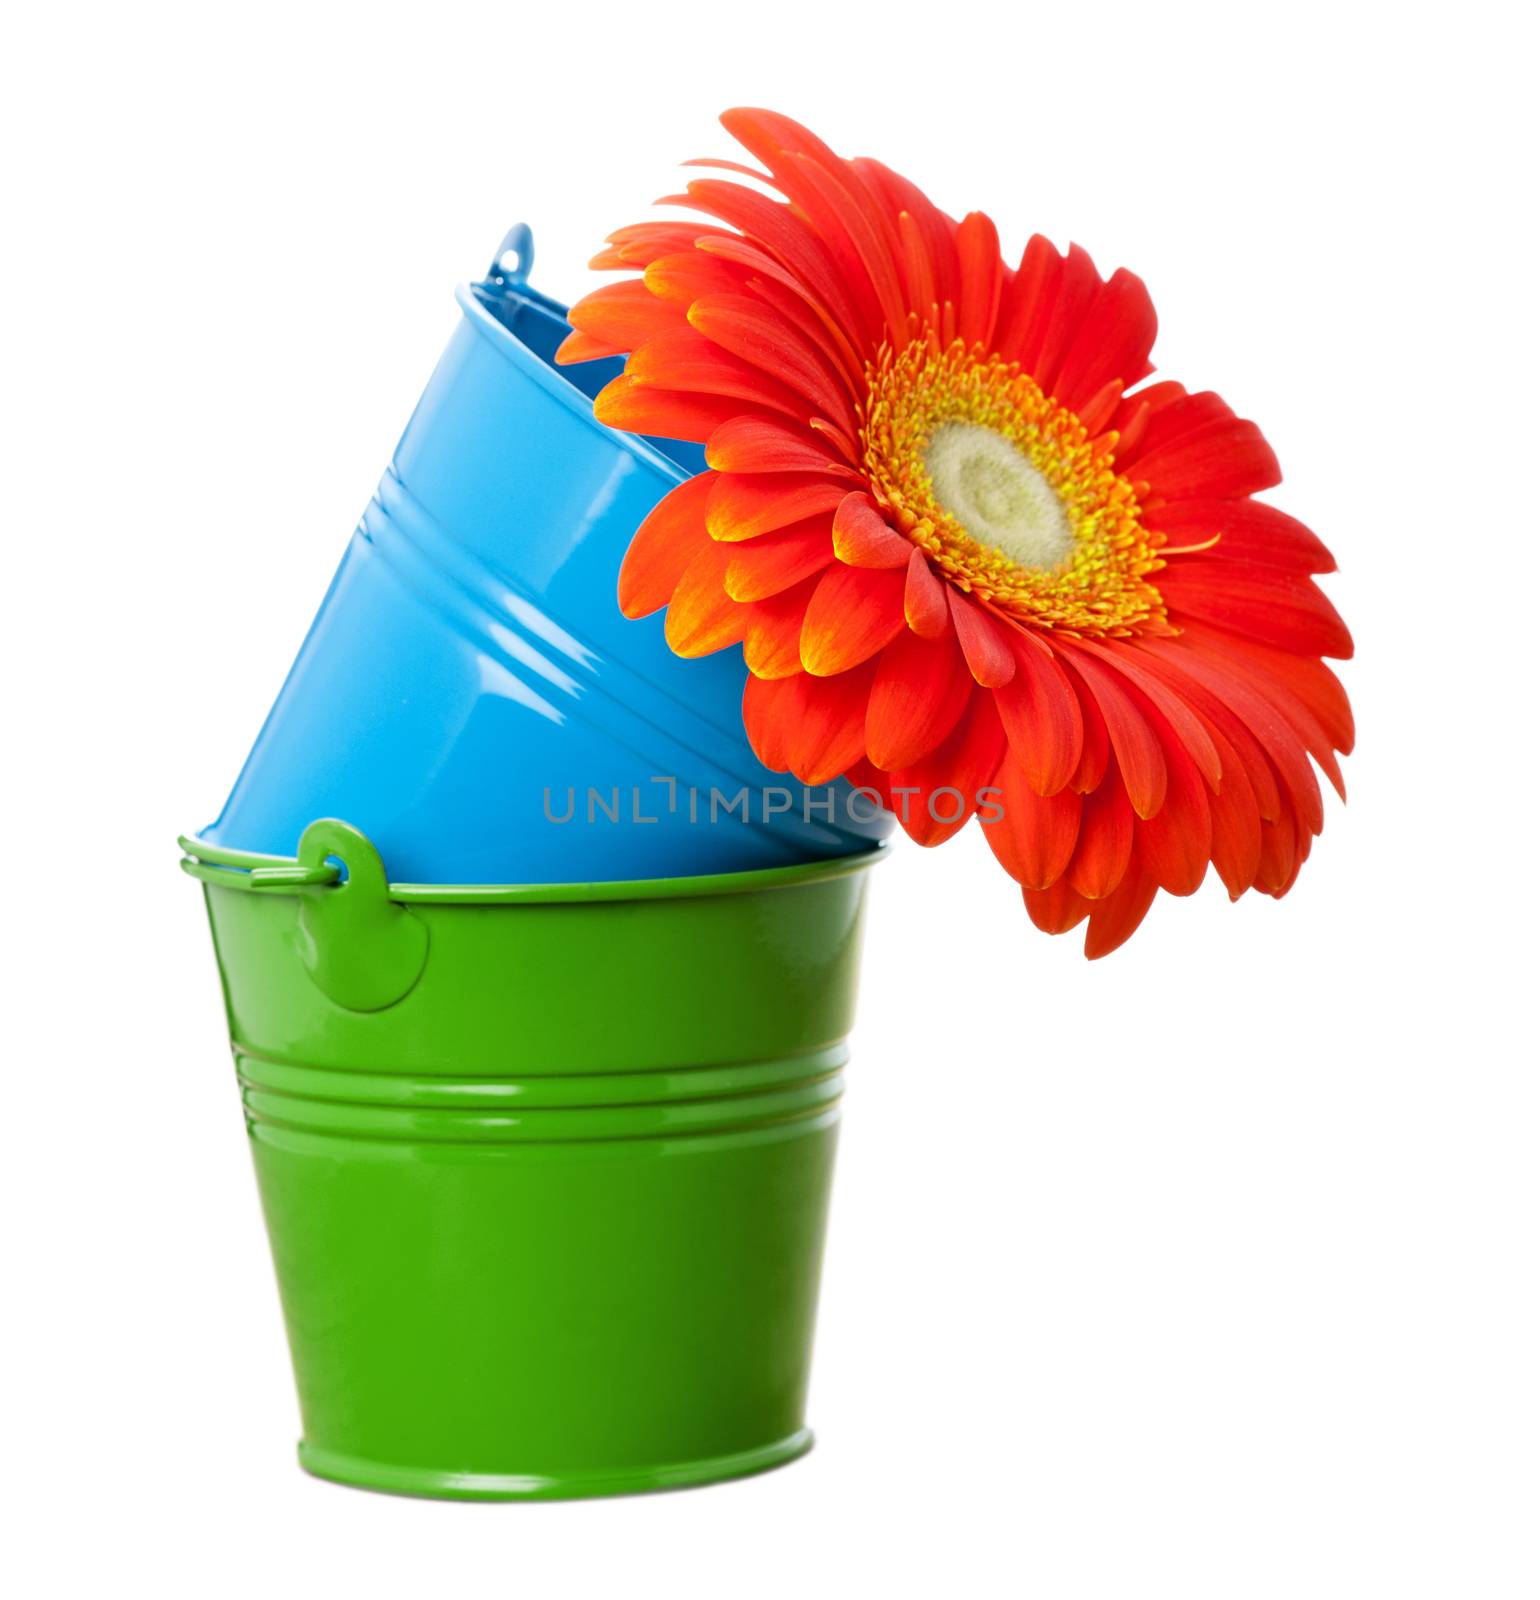 Vivid orange gerbera daisy flower in green and blue buckets isolated on white 